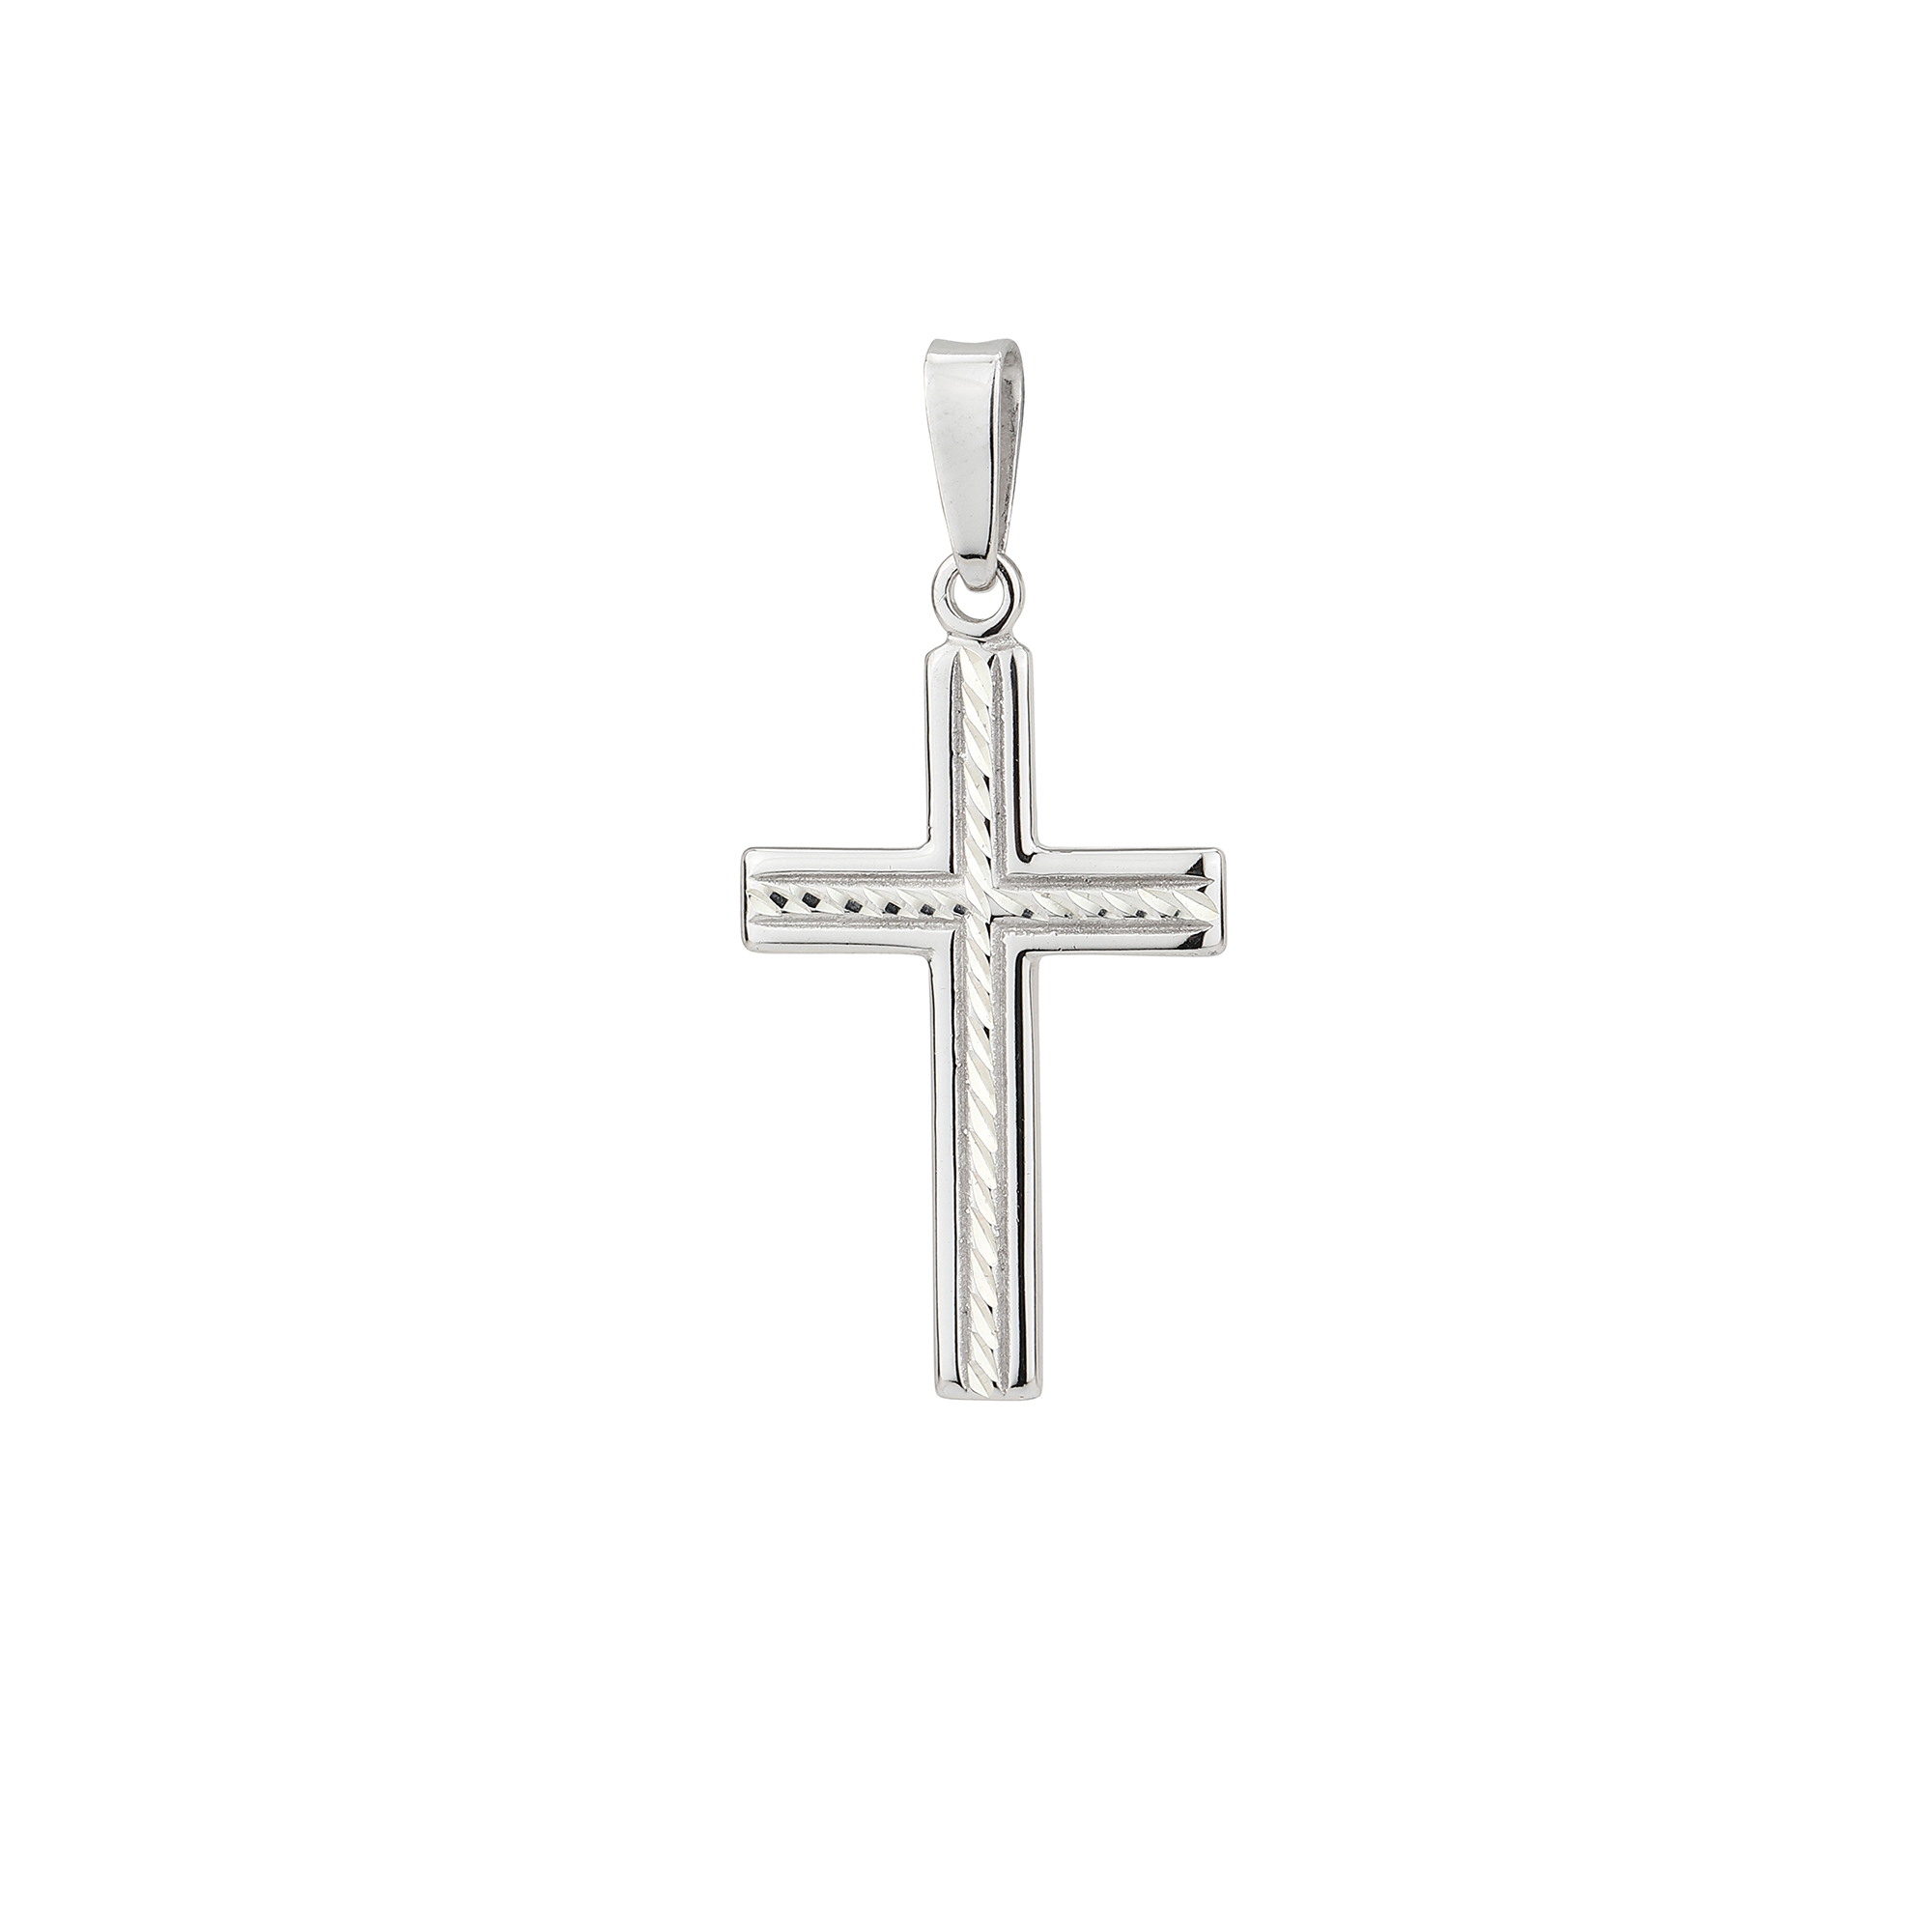 Plain Cross with Beveled Rope Design - The Silver Seahorse